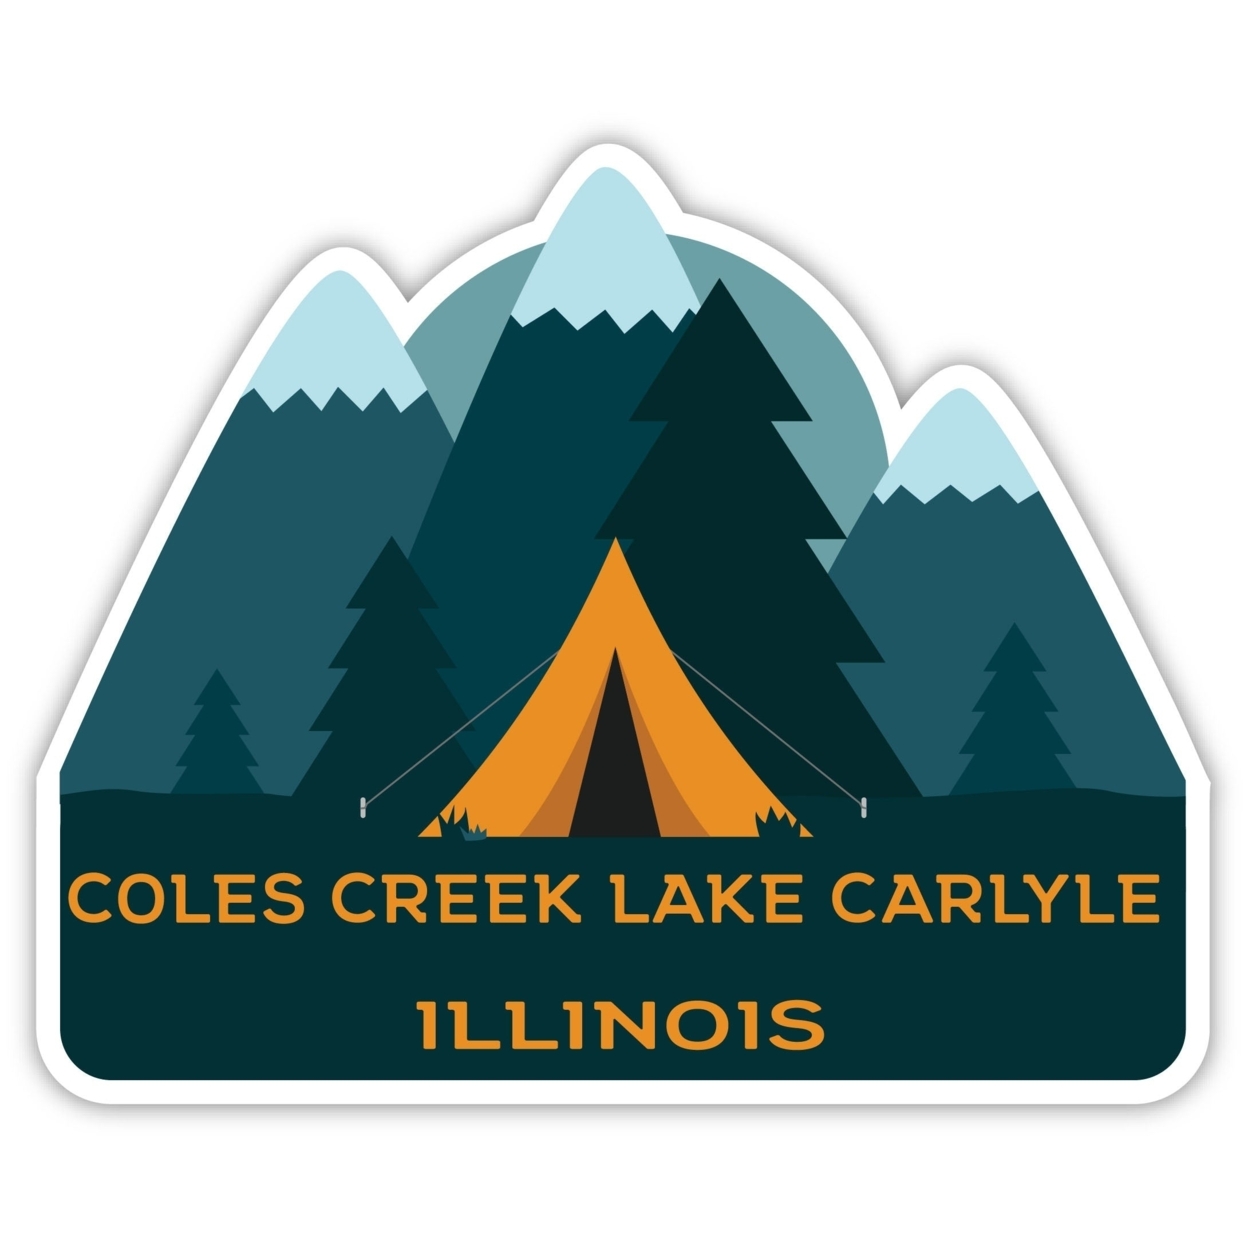 Coles Creek Lake Carlyle Illinois Souvenir Decorative Stickers (Choose Theme And Size) - 4-Pack, 12-Inch, Tent